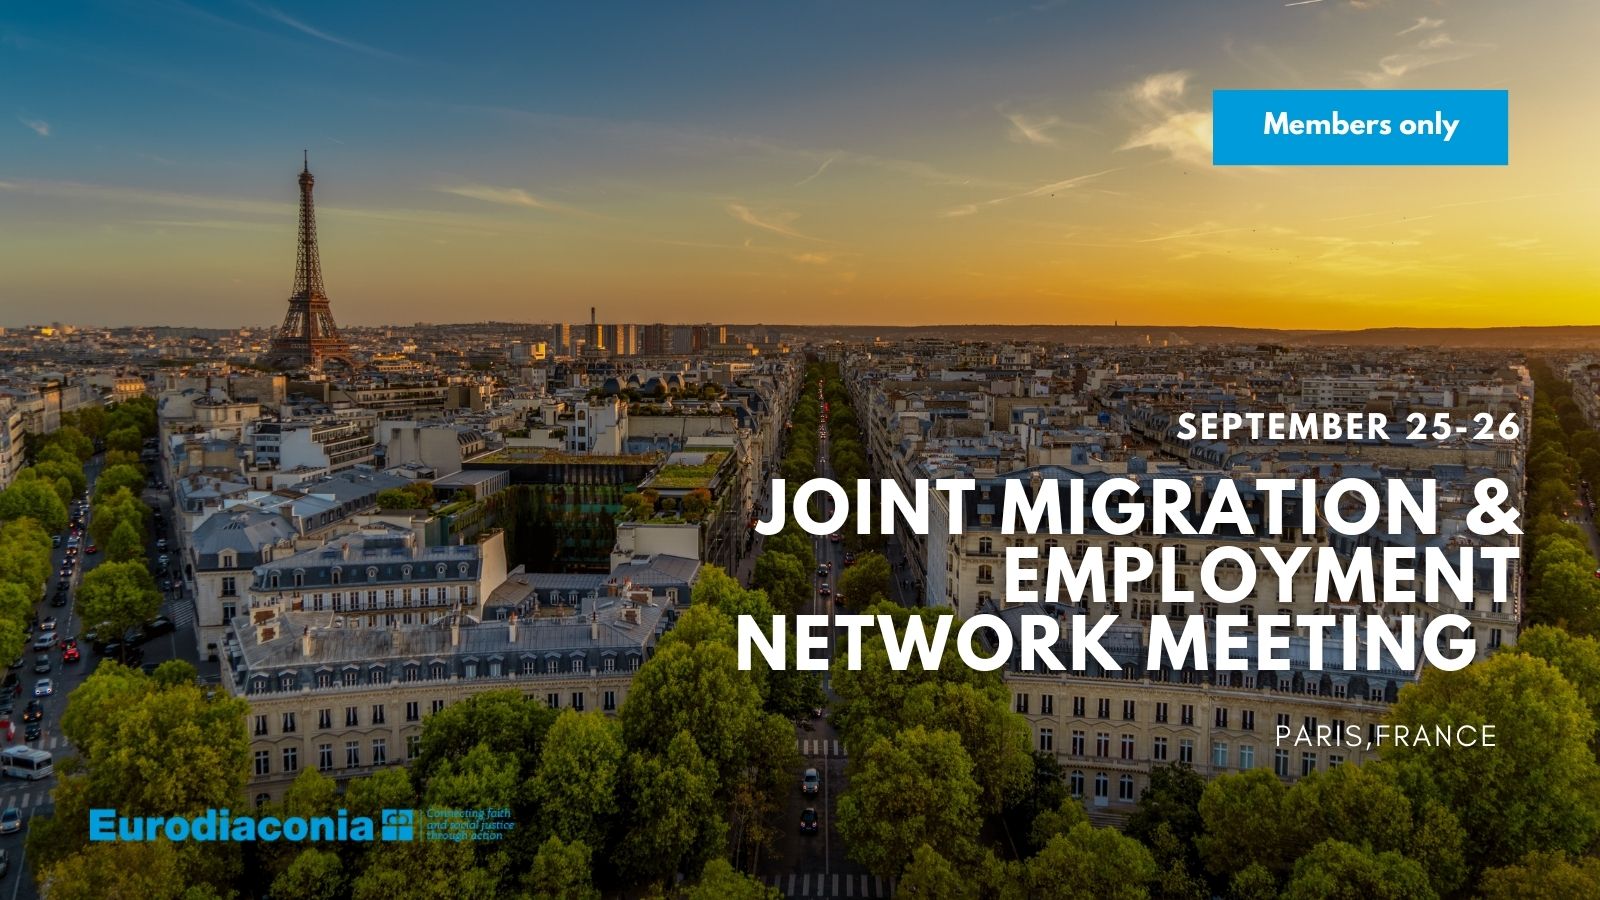 Joint Migration & Employment Network Meeting | Joint Event with European Social Network